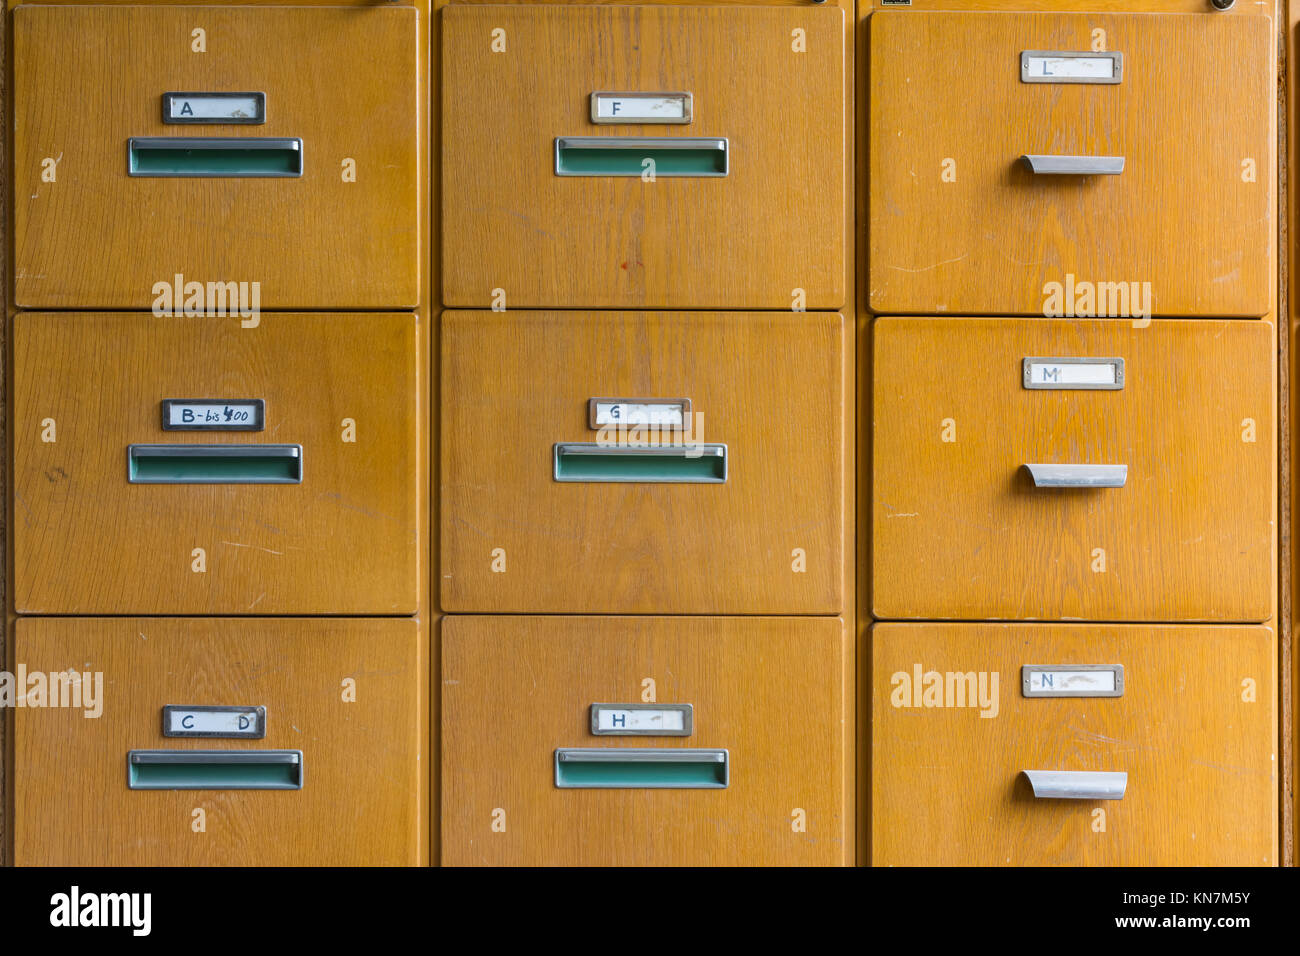 Wooden File Cabinet Straight On Geometric Pattern Squares Empty Labels  Doors Closed Old Vintage Brown Office Supply Stock Photo - Alamy